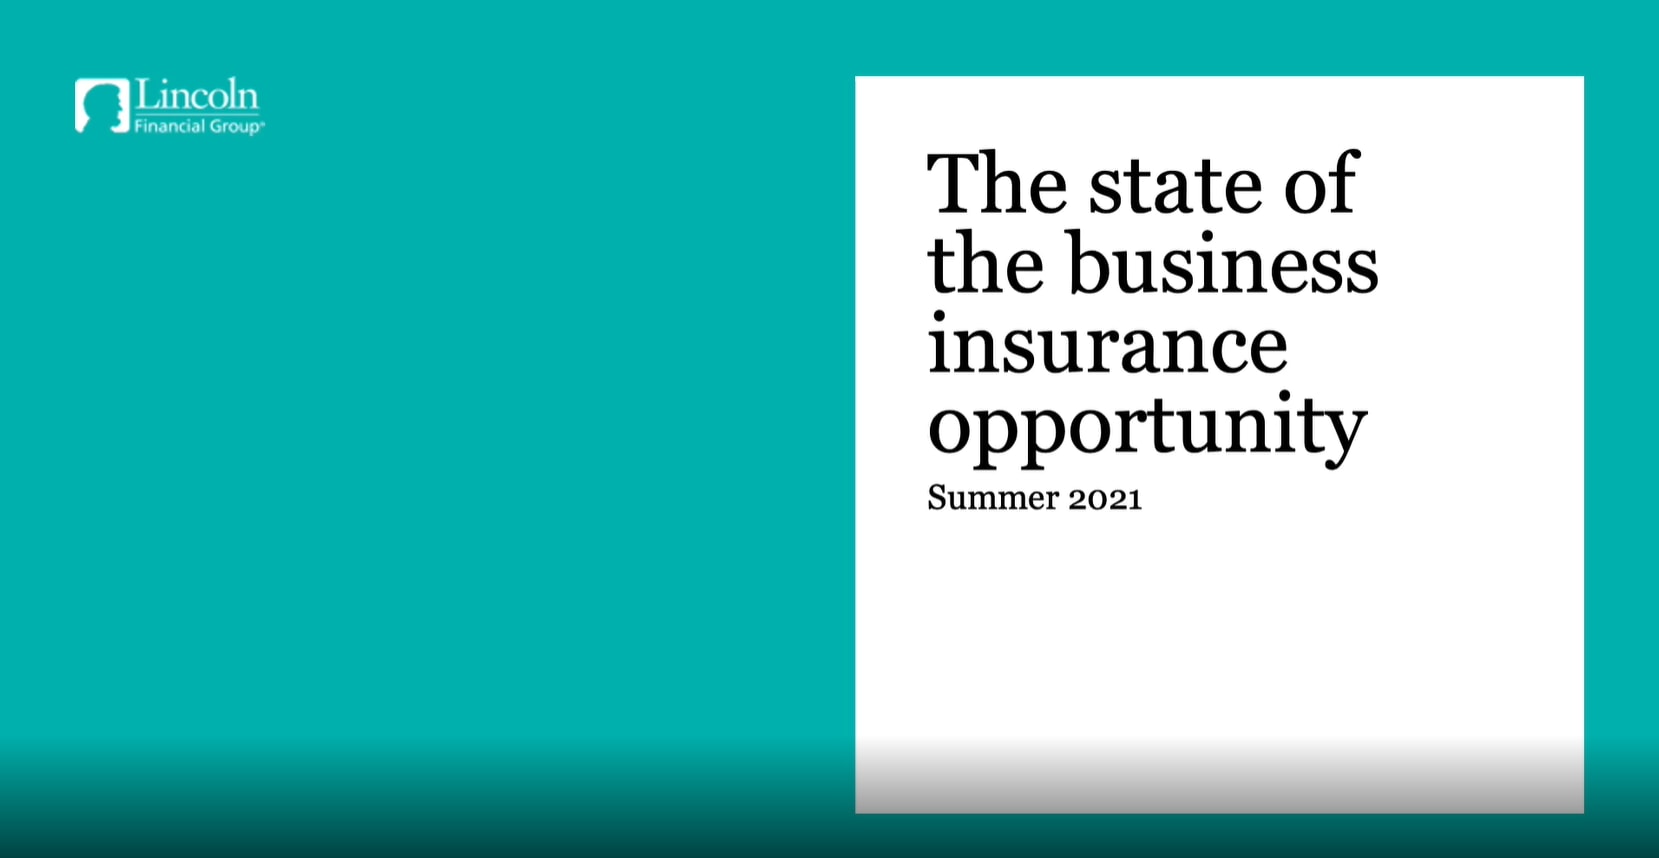 Take a look at the state of the business insurance opportunity